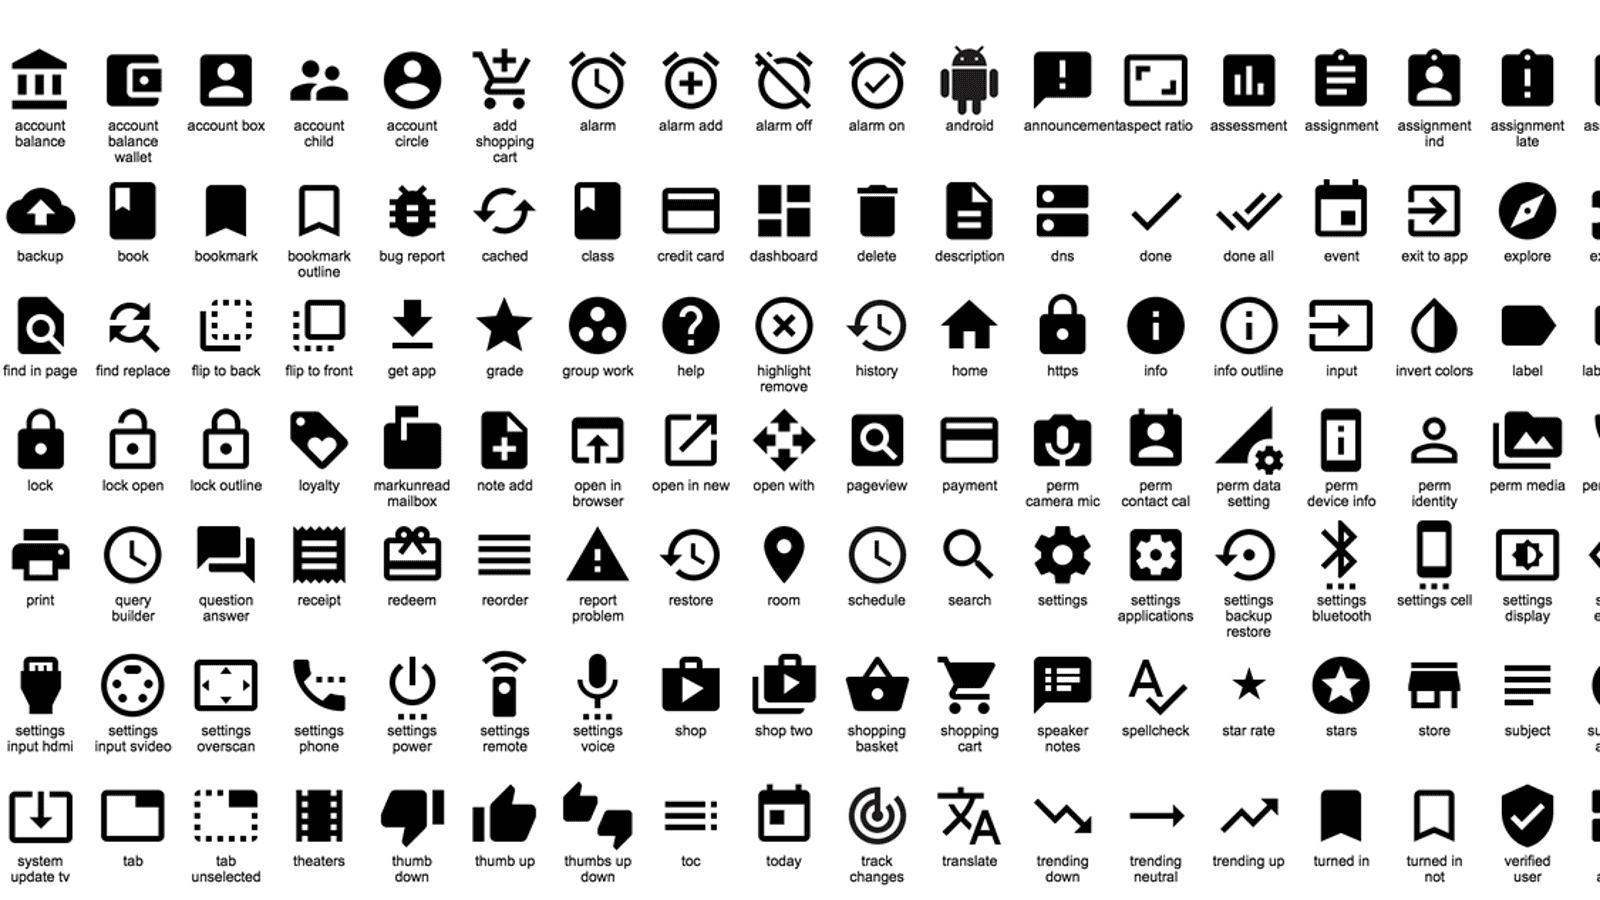 cool icon templates